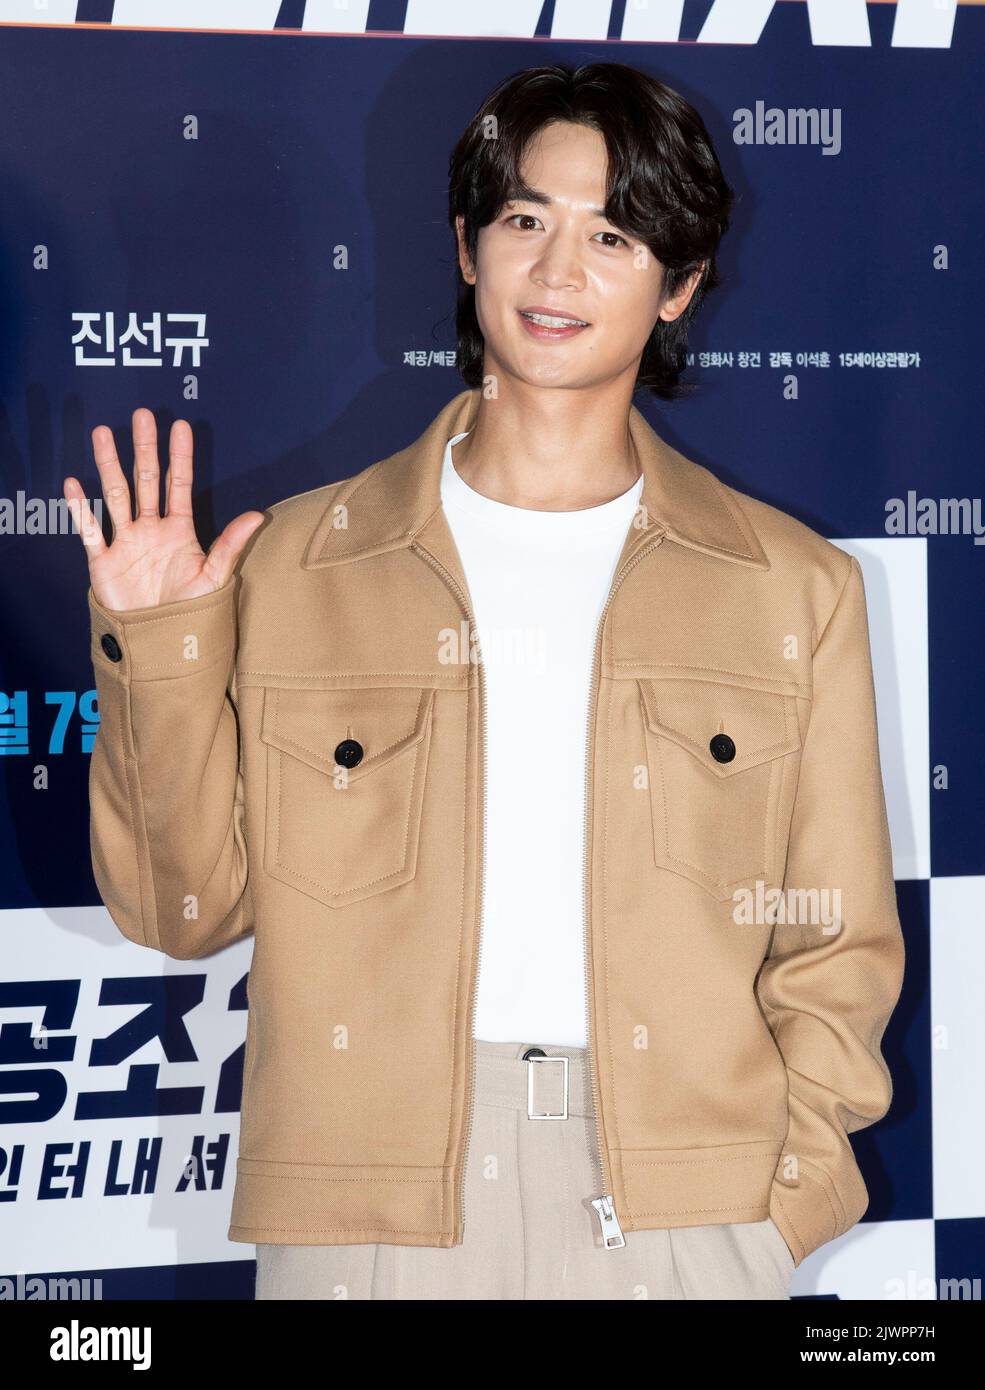 Seoul, South Korea. 6th Sep, 2022. South Korean singer and actor Minho, member of K-Pop boy band CHINee, pose for photos during a premiere of the film 'Confidential Assignment 2: International' in Seoul, South Korea on September 6, 2022. The movie is to be released in South Korea on September 7. (Photo by Lee Young-ho/Sipa USA) Credit: Sipa USA/Alamy Live News Stock Photo